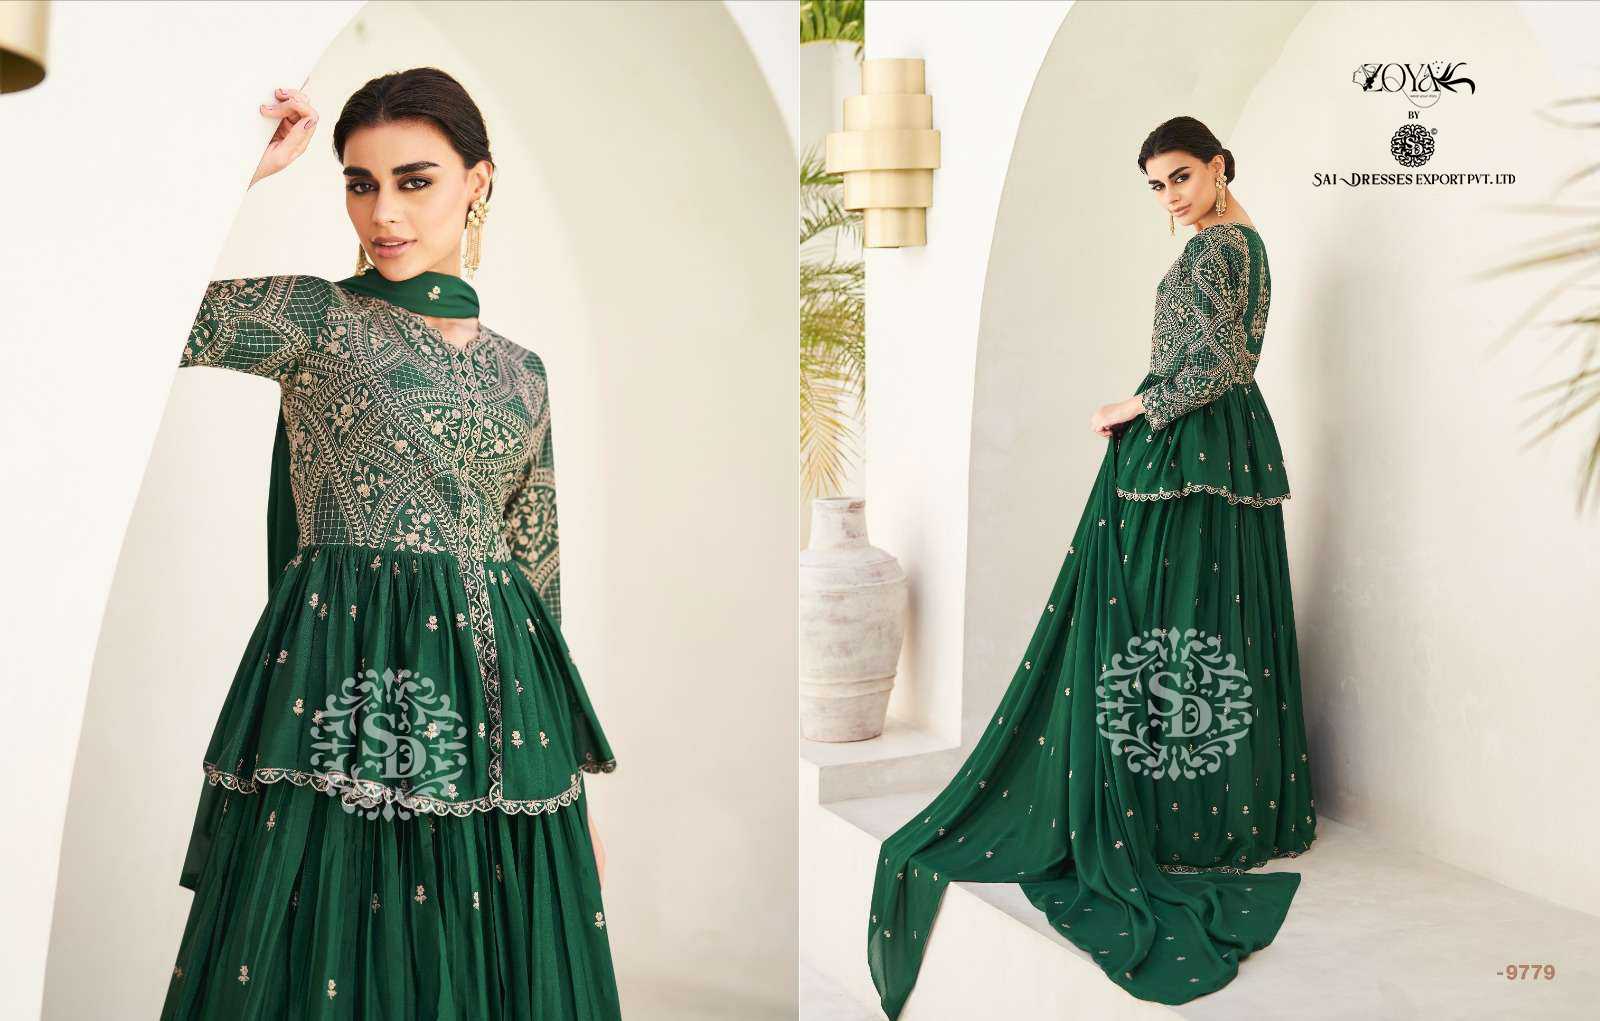 SAI DRESSES PRESENT NAAZ READYMADE TRENDY WEAR HEAVY DESIGNER SUITS IN WHOLESALE RATE IN SURAT